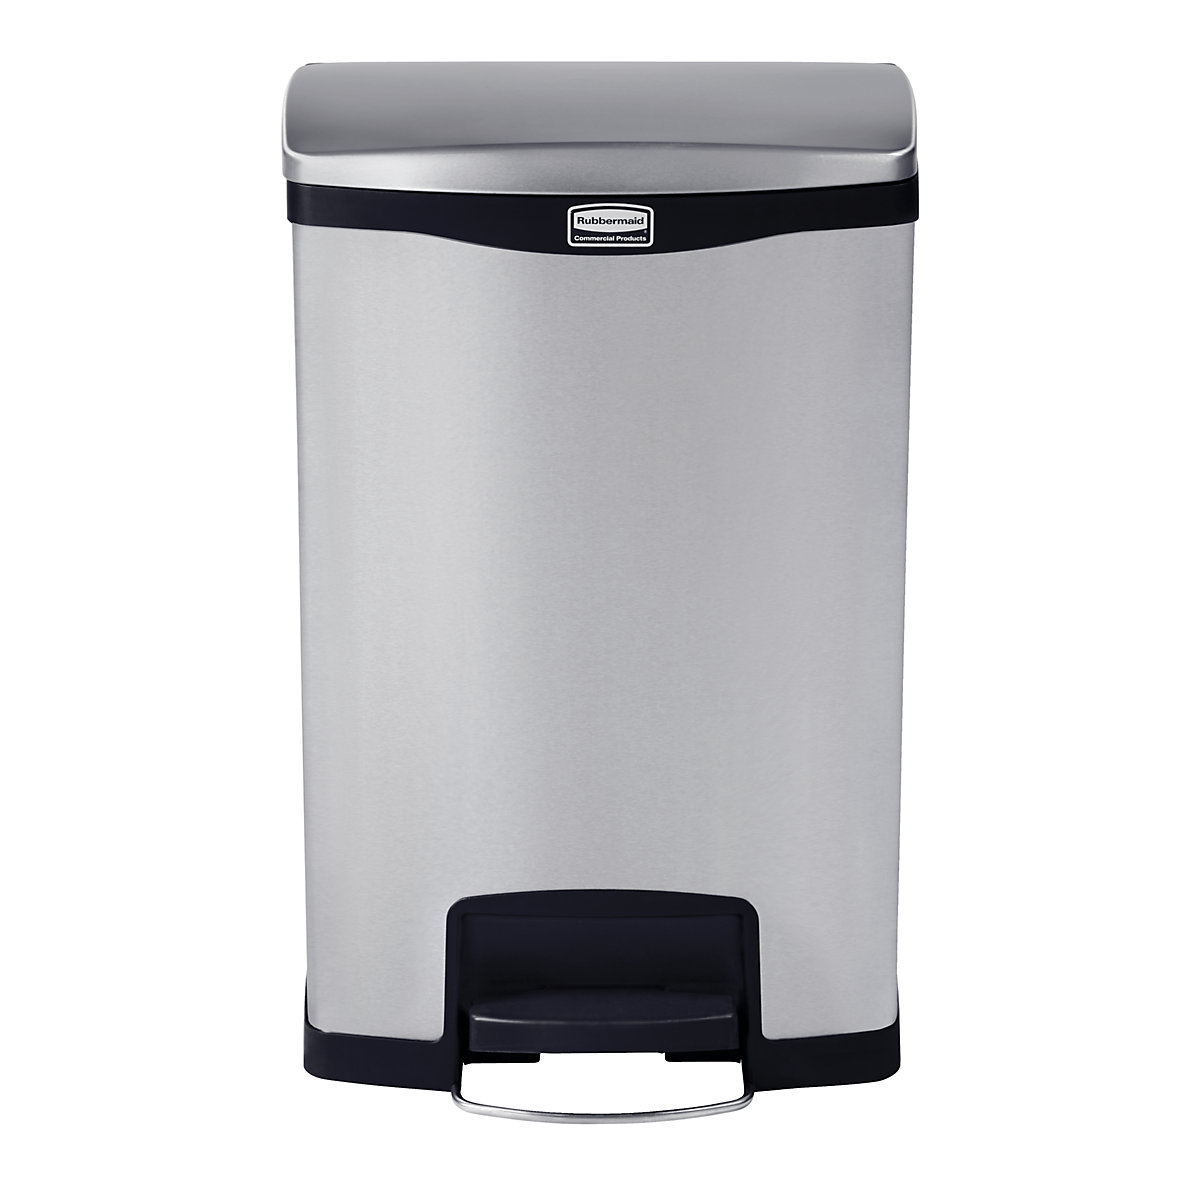 SLIM JIM® stainless steel waste collector with pedal - Rubbermaid